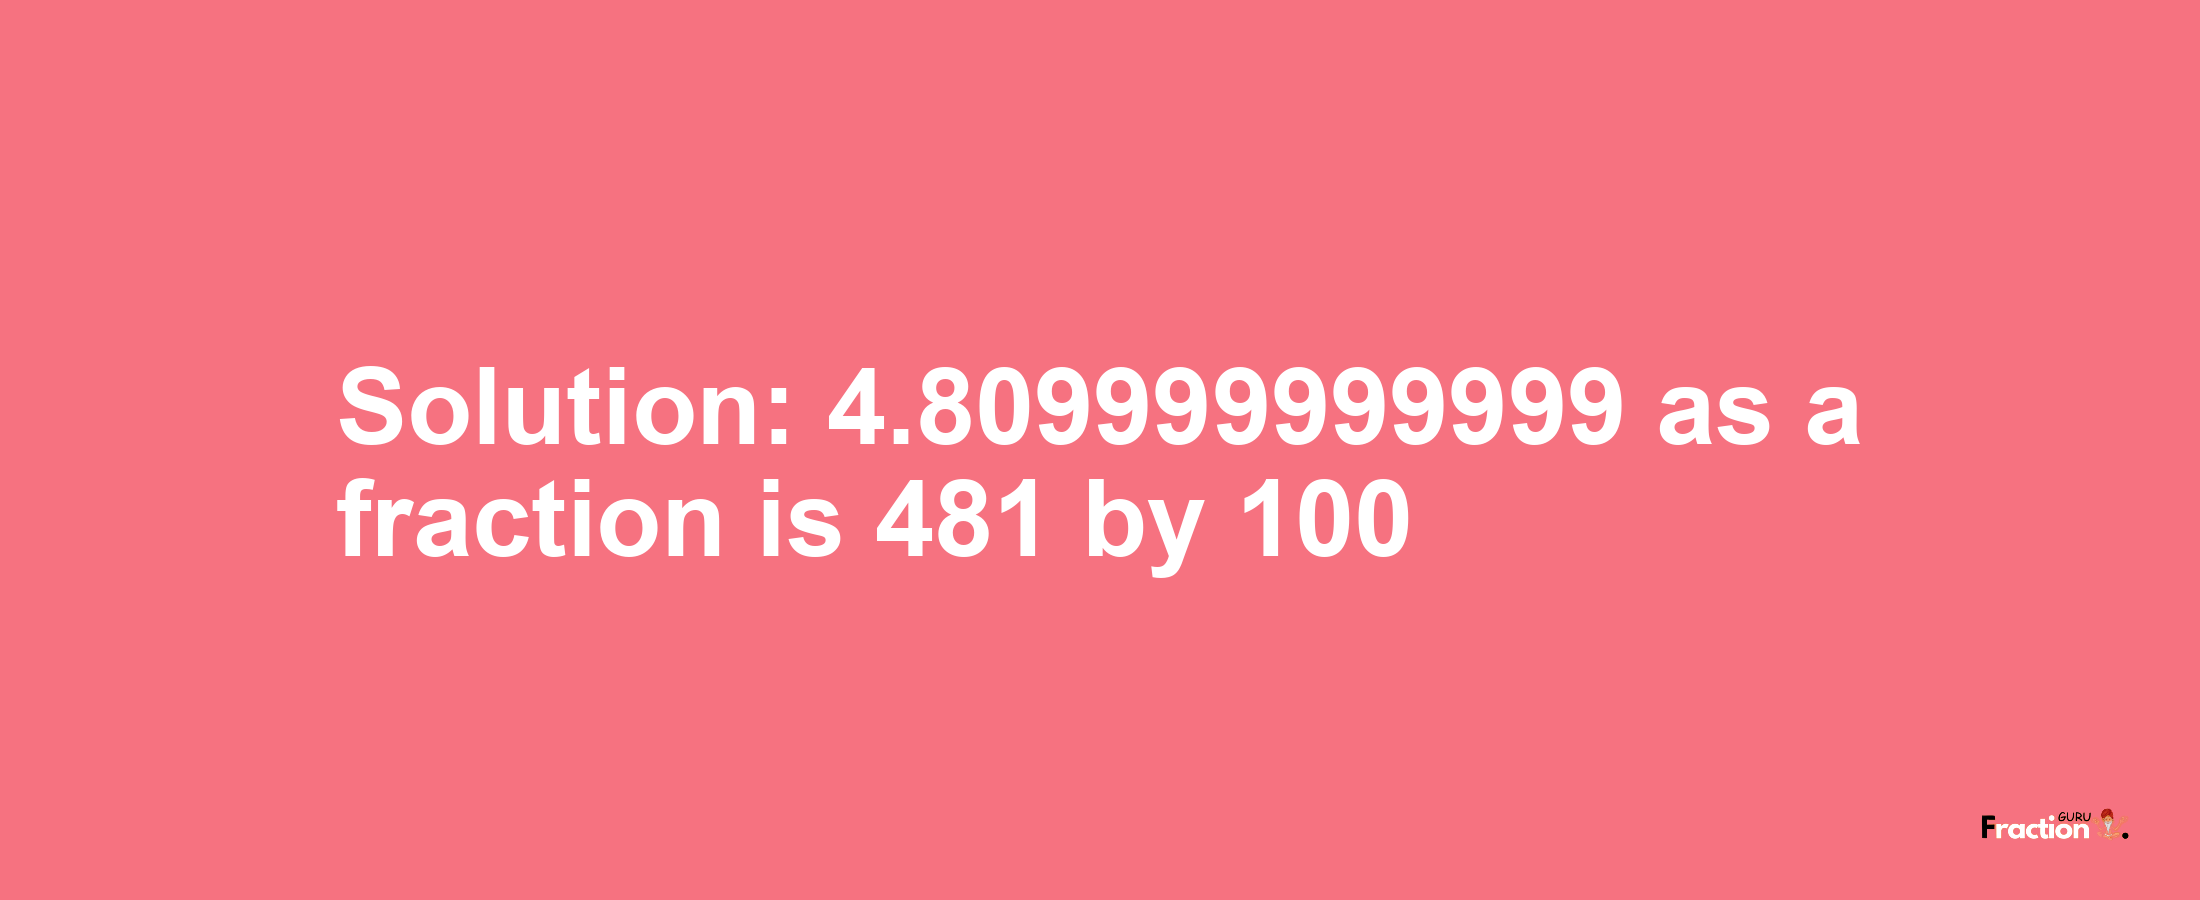 Solution:4.809999999999 as a fraction is 481/100